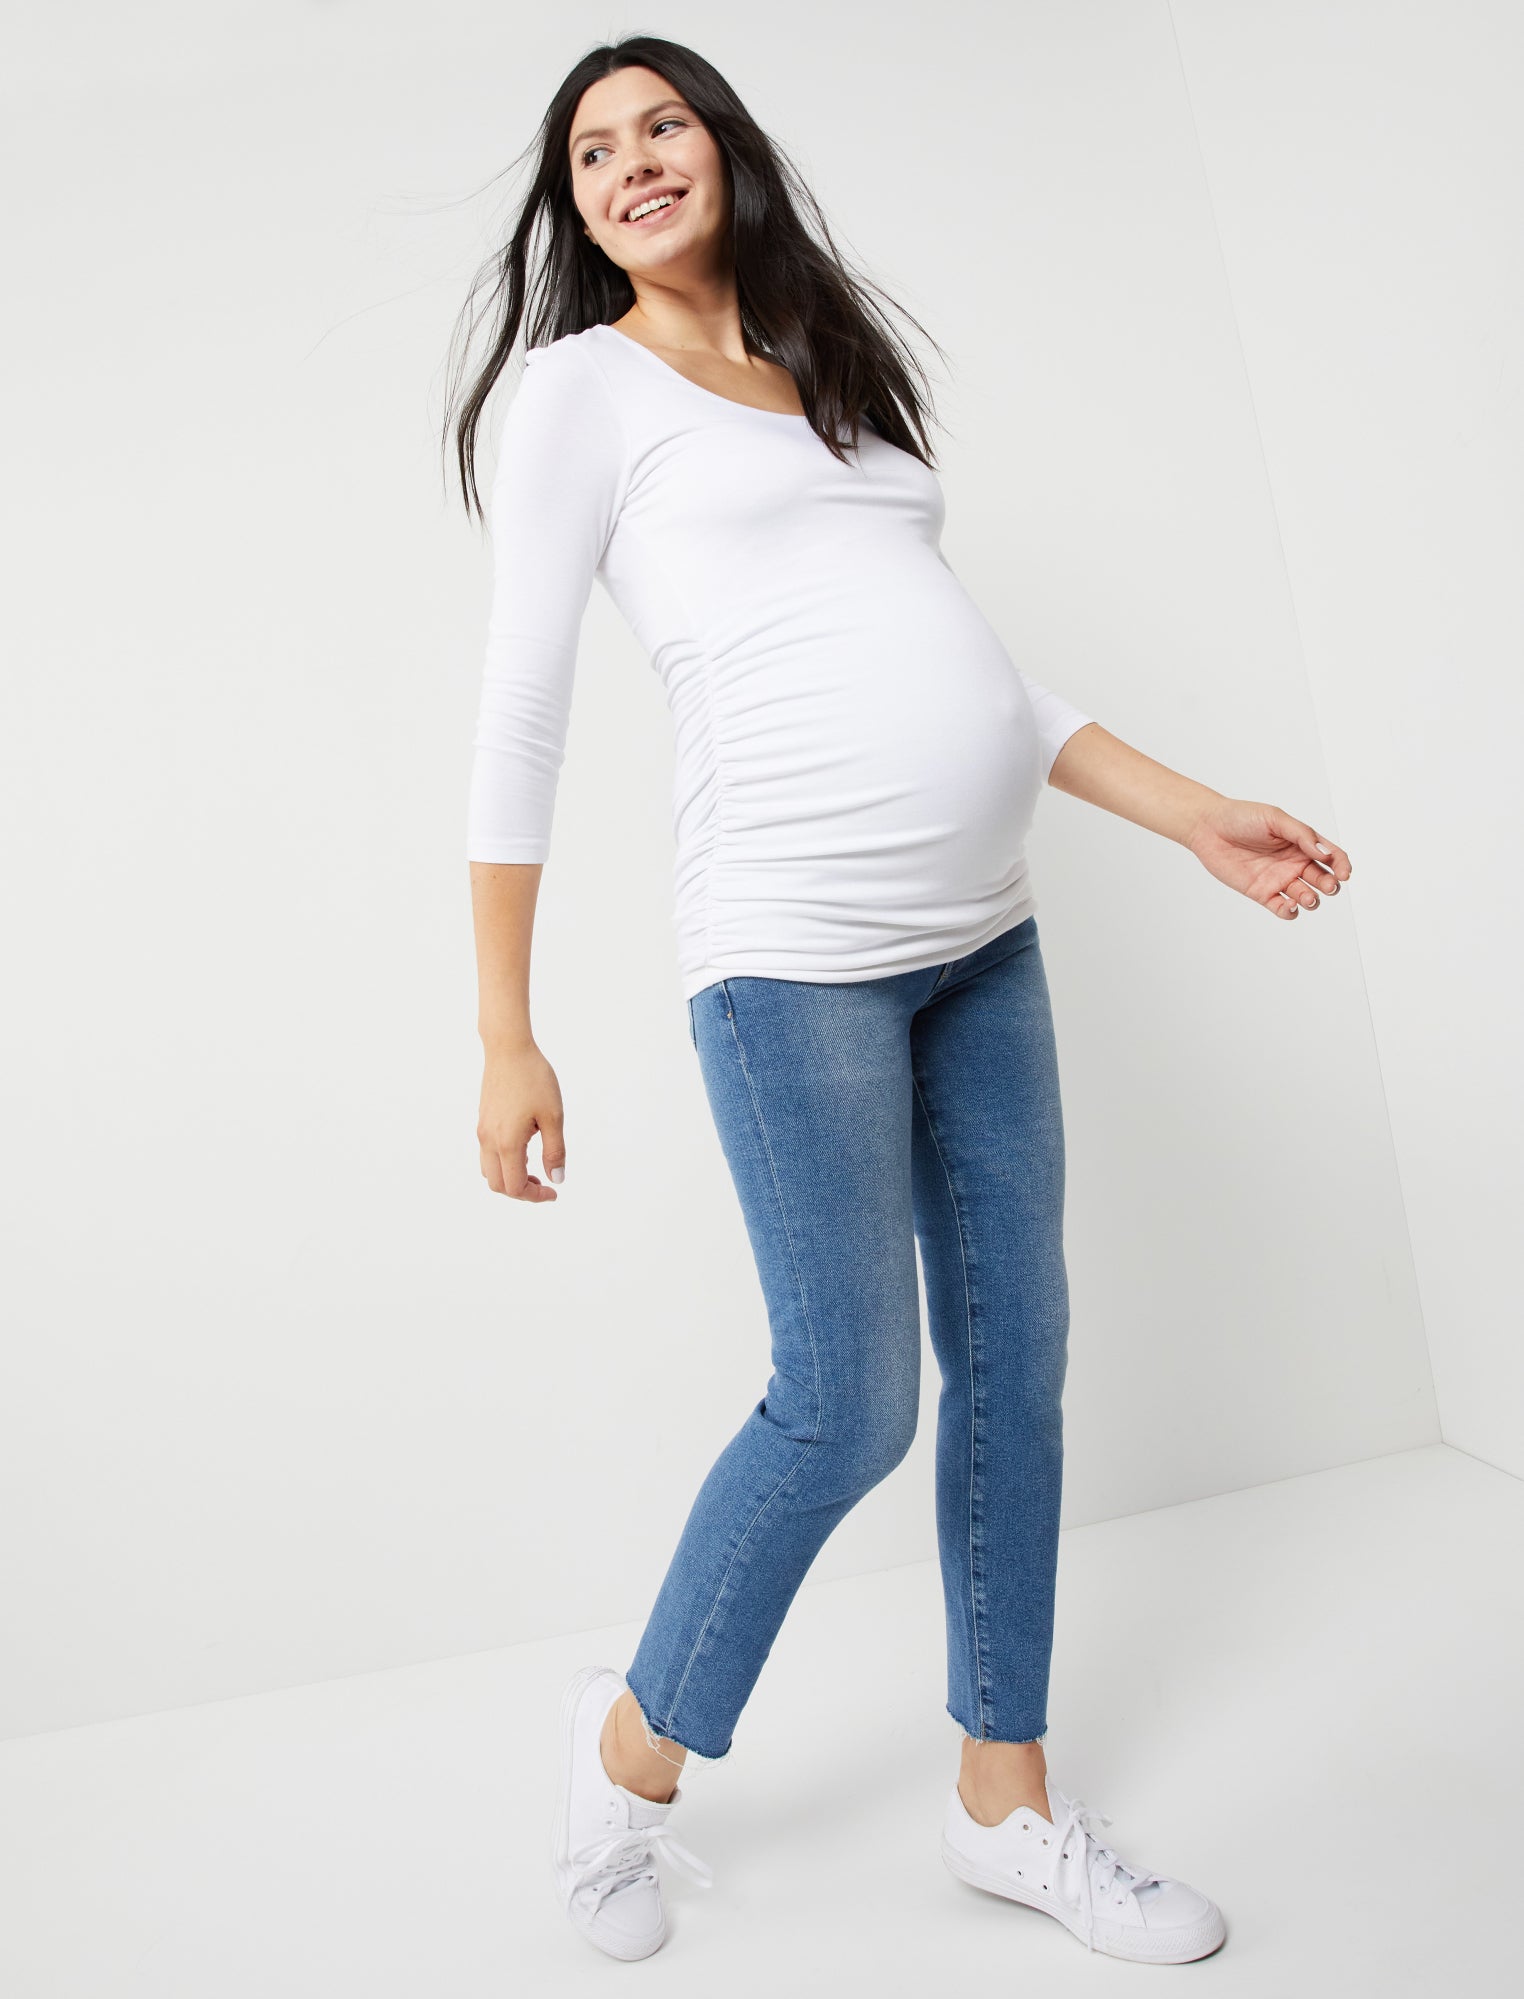 MATERNITY JEANS REVIEW: 13 PAIRS OF MATERNITY JEANS AND WHAT WORKED AND  DIDN'T WORK ABOUT EACH